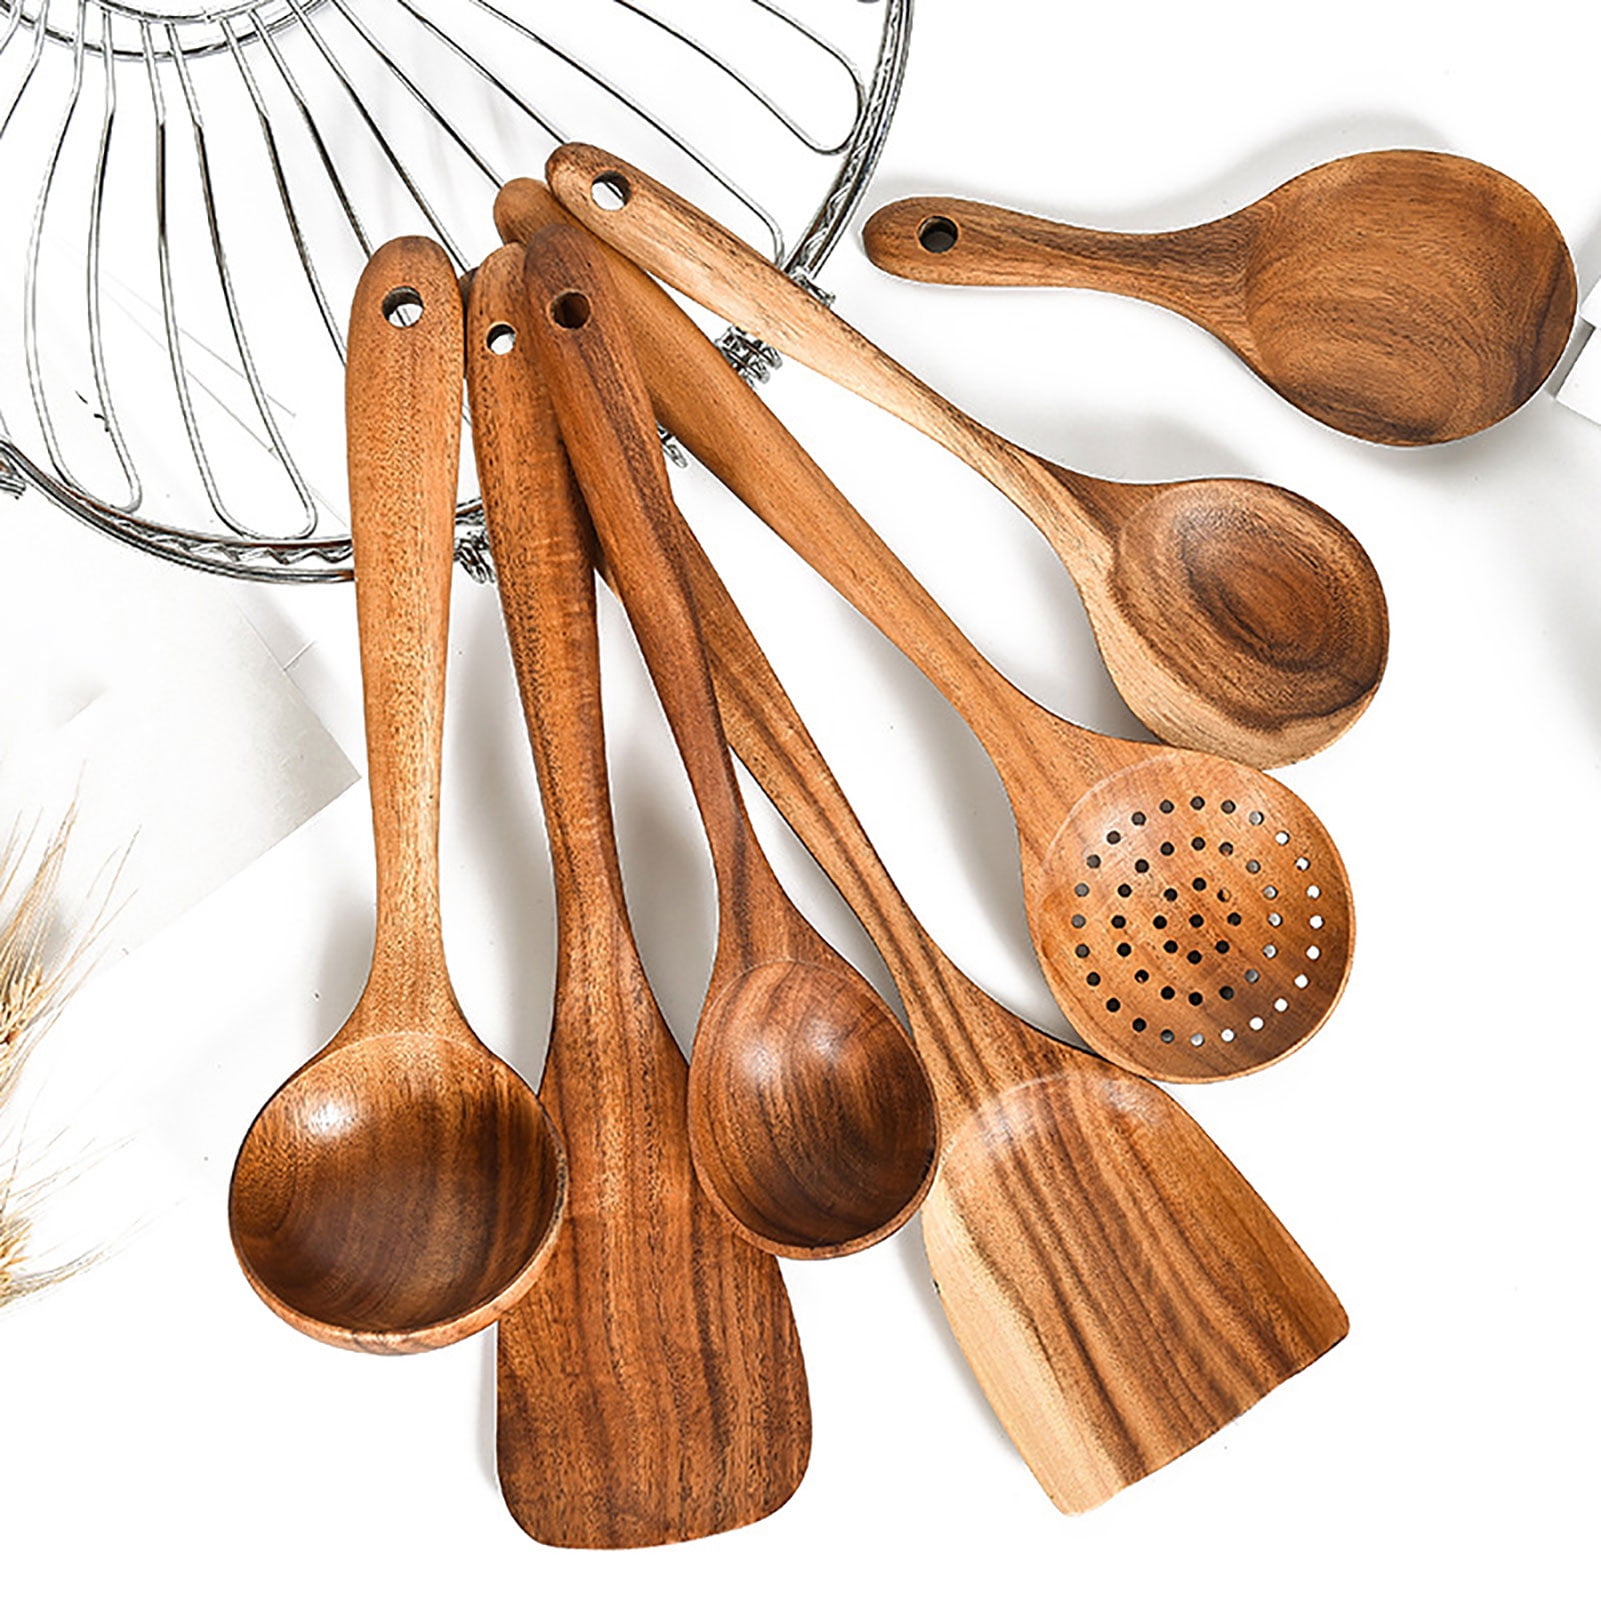 Spoon and Spatula Mix Wooden Kitchen Tools Perfect for Nonstick Cookware by Bamboni 6 Piece Set Bamboo Cooking Utensils with Holder 